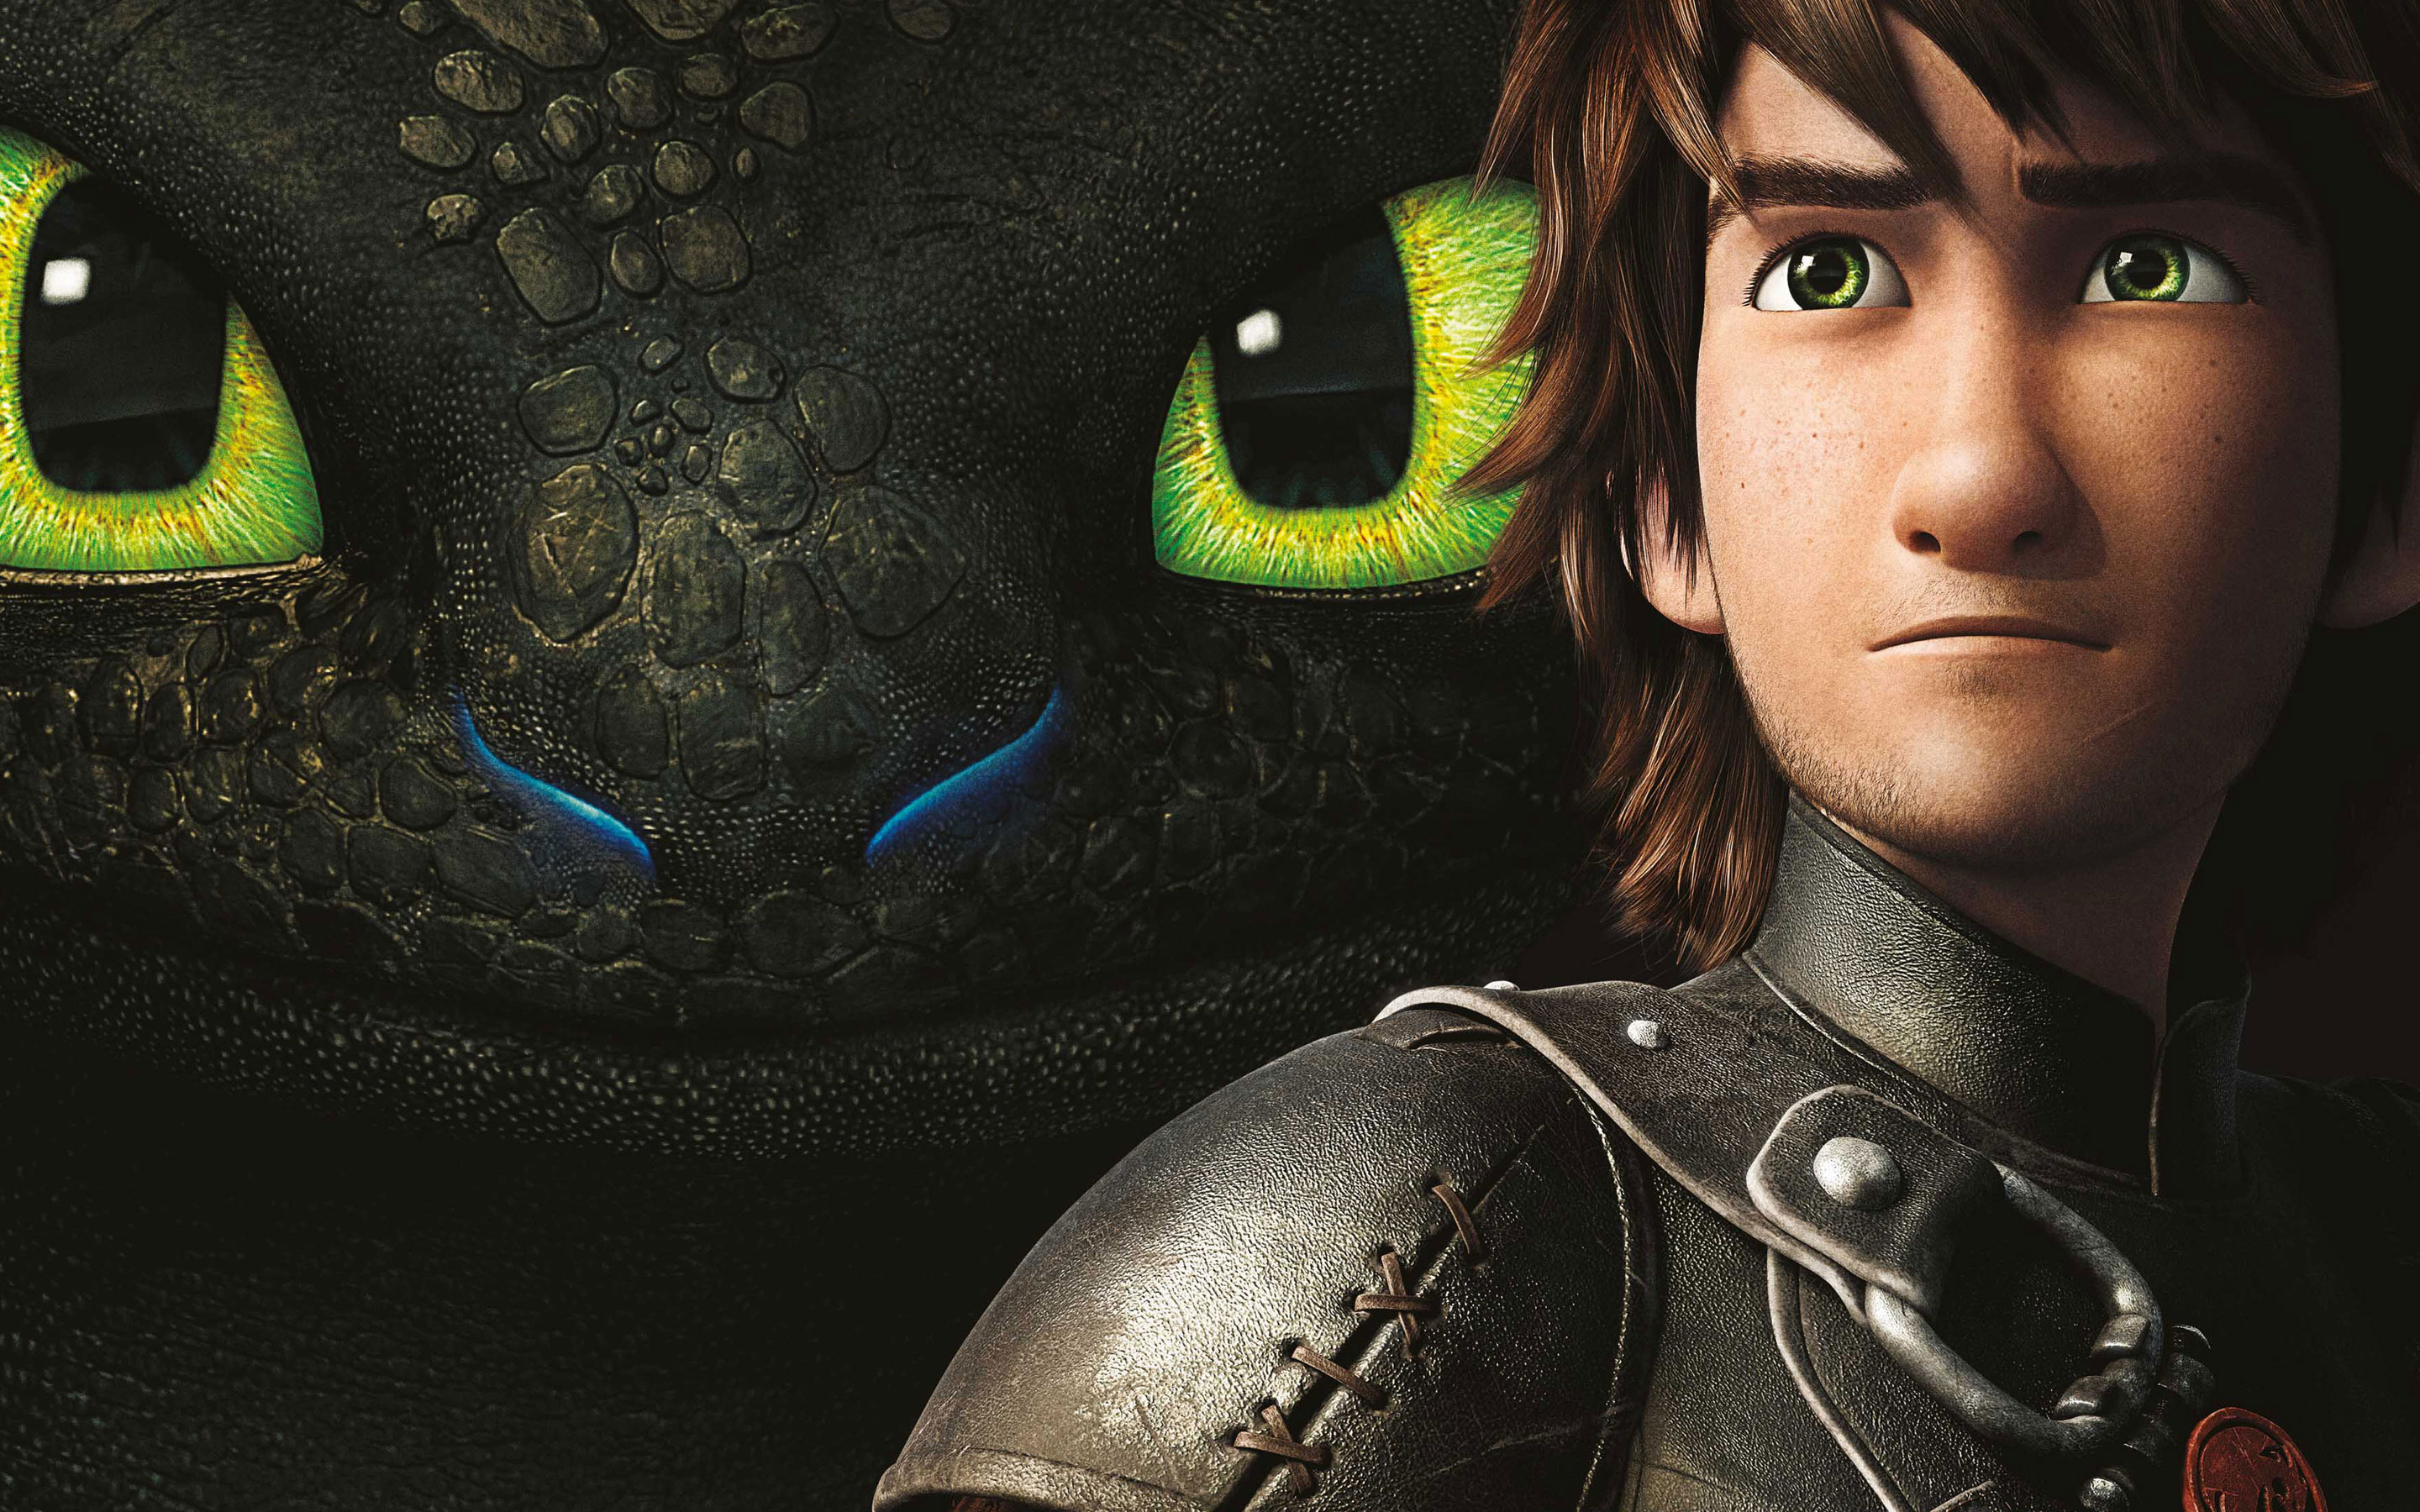 How to train your dragon 2 wallpaper hd